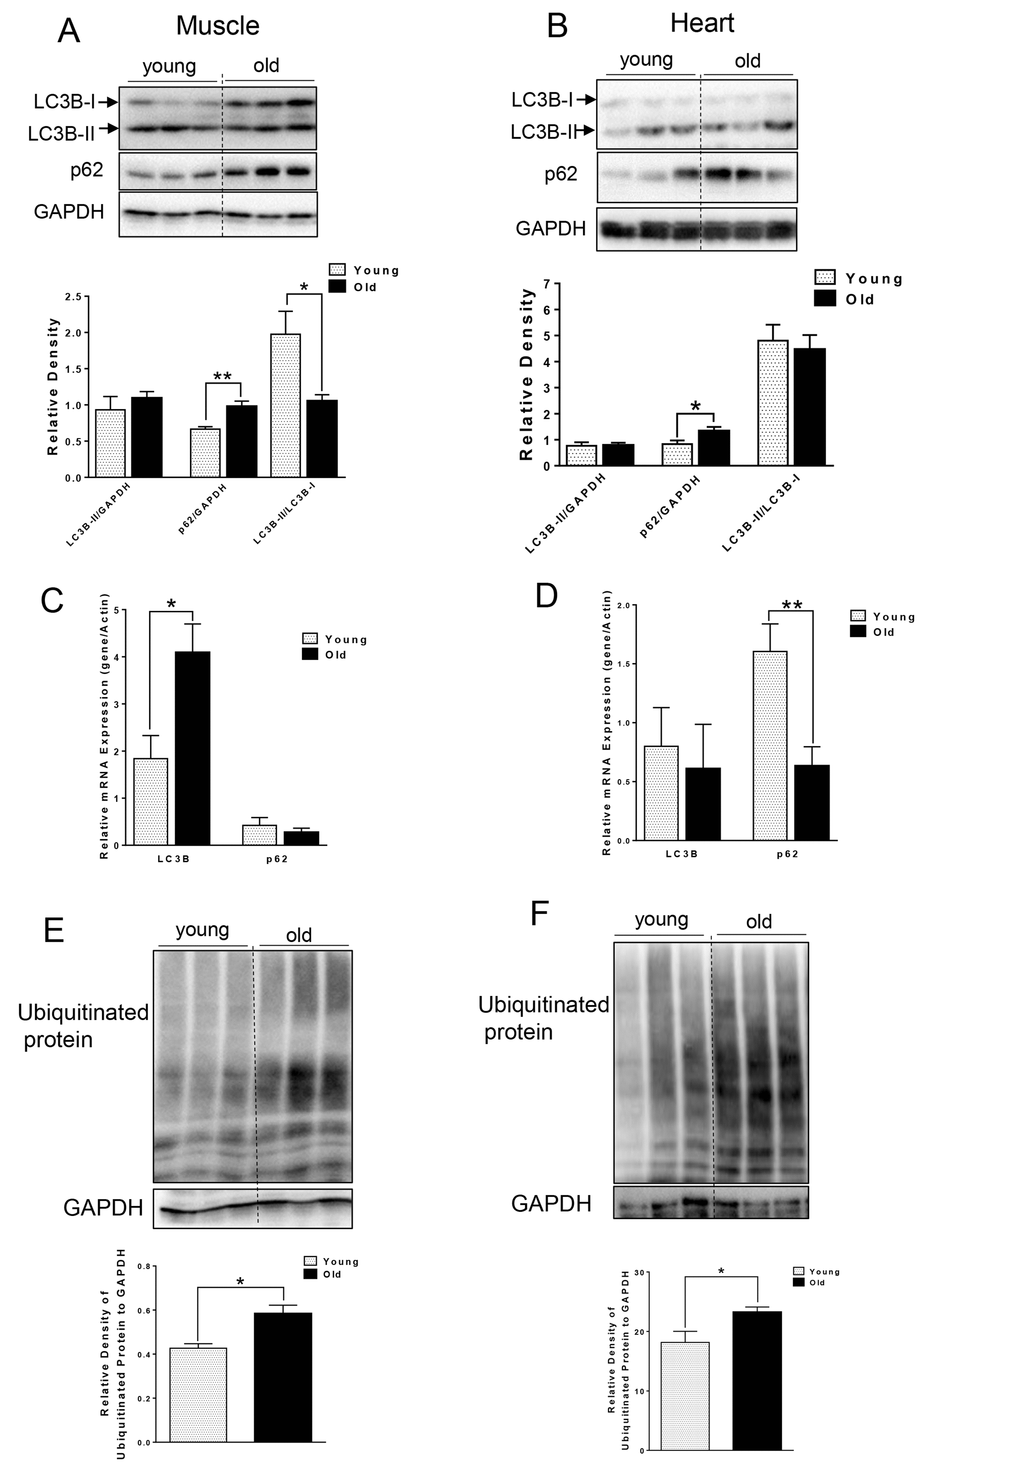 Accumulation of p62 and ubiquitinated proteins in old skeletal and cardiac muscle. (A-B) Immunoblot and densitometric analysis of LC3B and p62 in young and old skeletal muscle (A) and heart (B). (C-D) mRNA expression of LC3B, p62 in young and old skeletal muscle (C) and heart (D). (E-F) Immunoblot and densitometric analysis of ubiquitinated proteins in young and old skeletal muscle (E) and heart (F). Values are means±SEM for 6 young and 5 old mice in each group. *P 